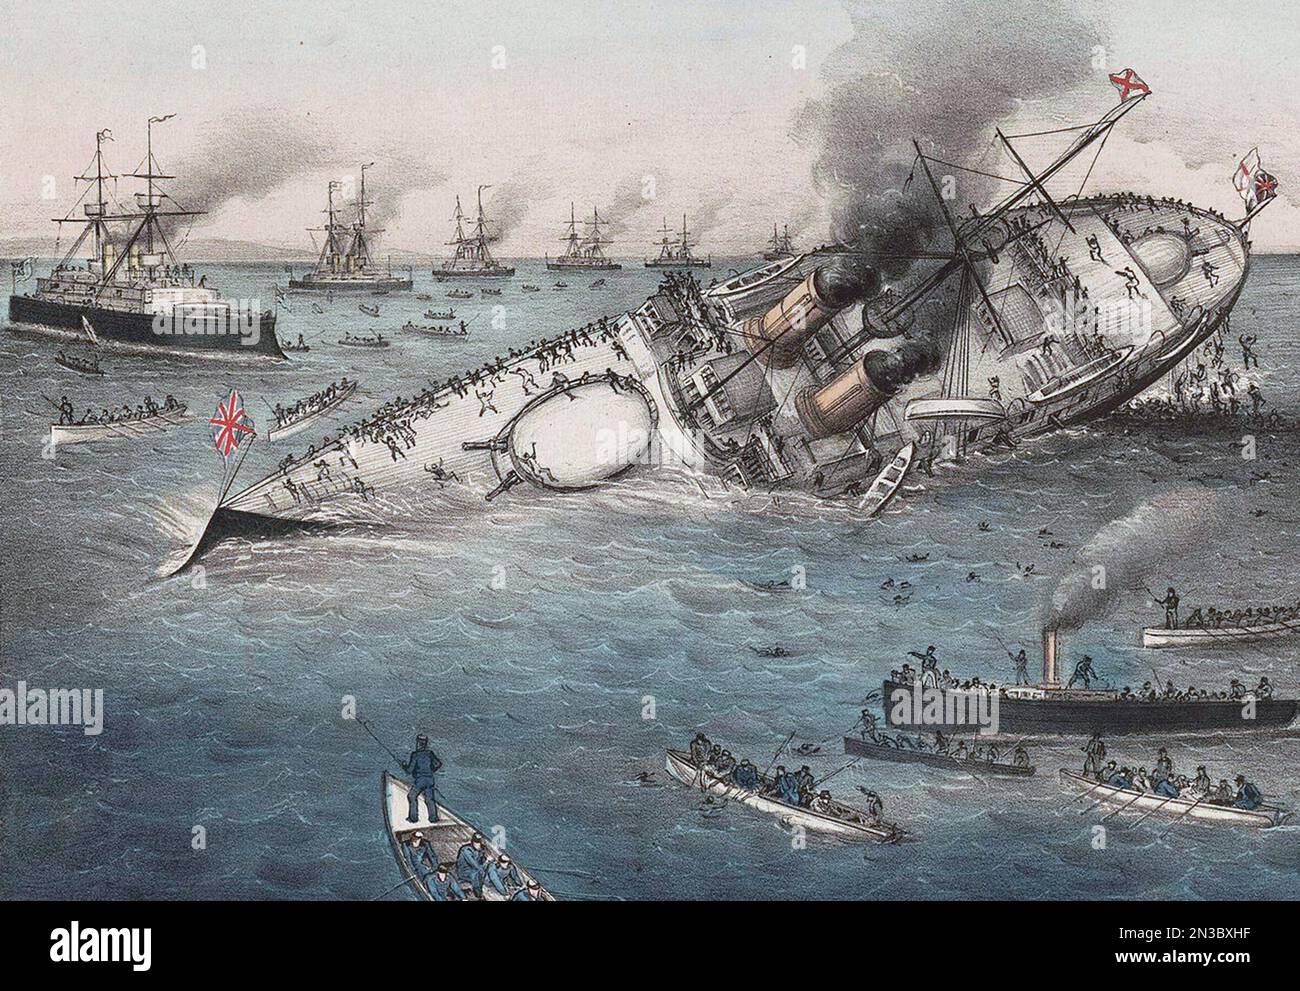 HMS Victoria (1887) sunk by H.M.S. Camperdown after the fleet admiral ordered the two ships to turn into each other Stock Photo